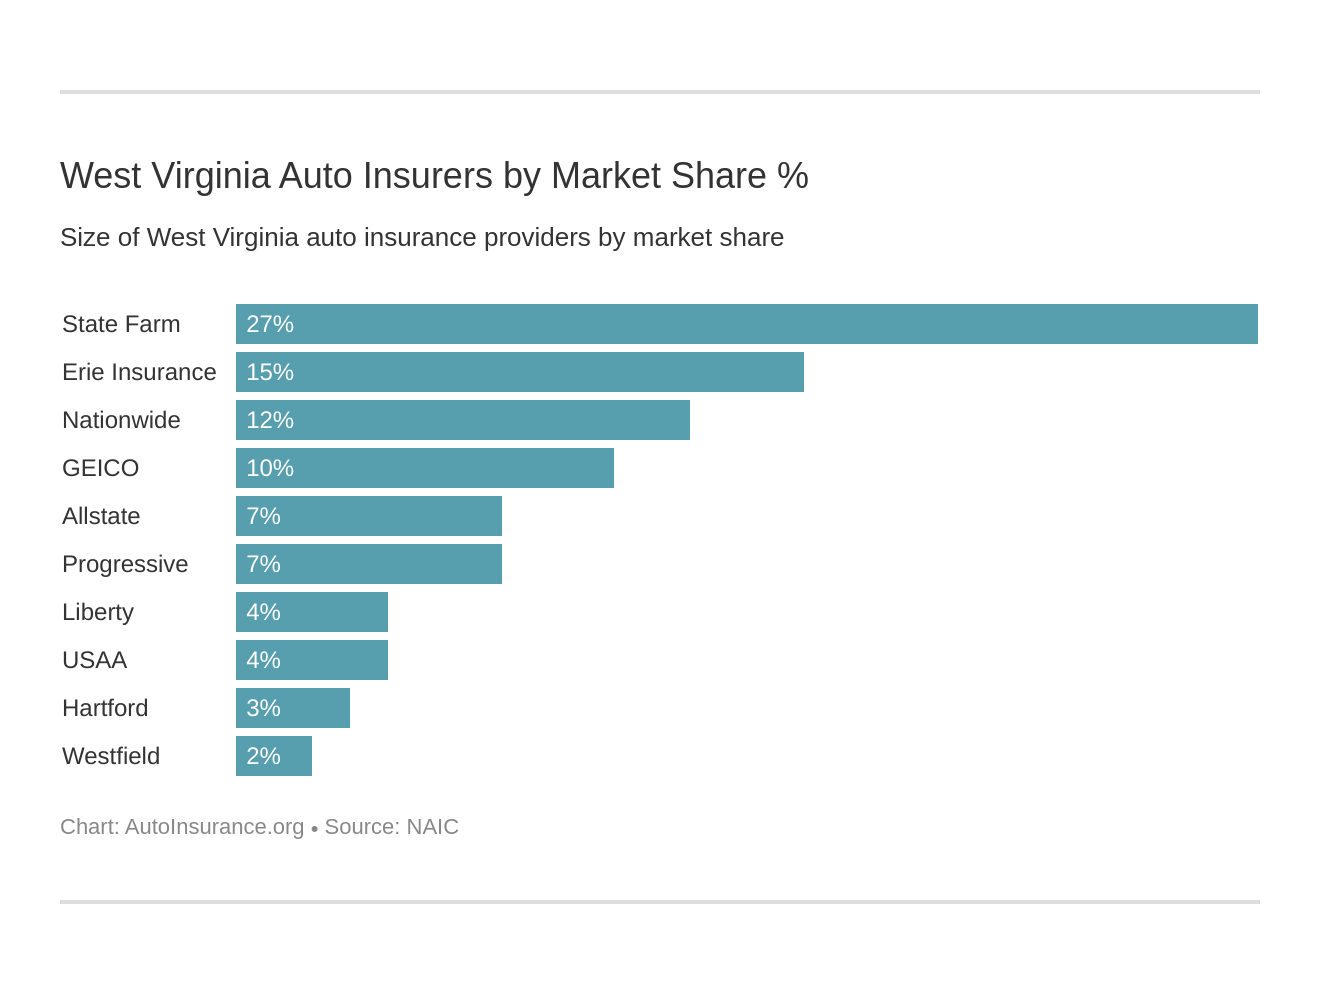 West Virginia Auto Insurers by Market Share %